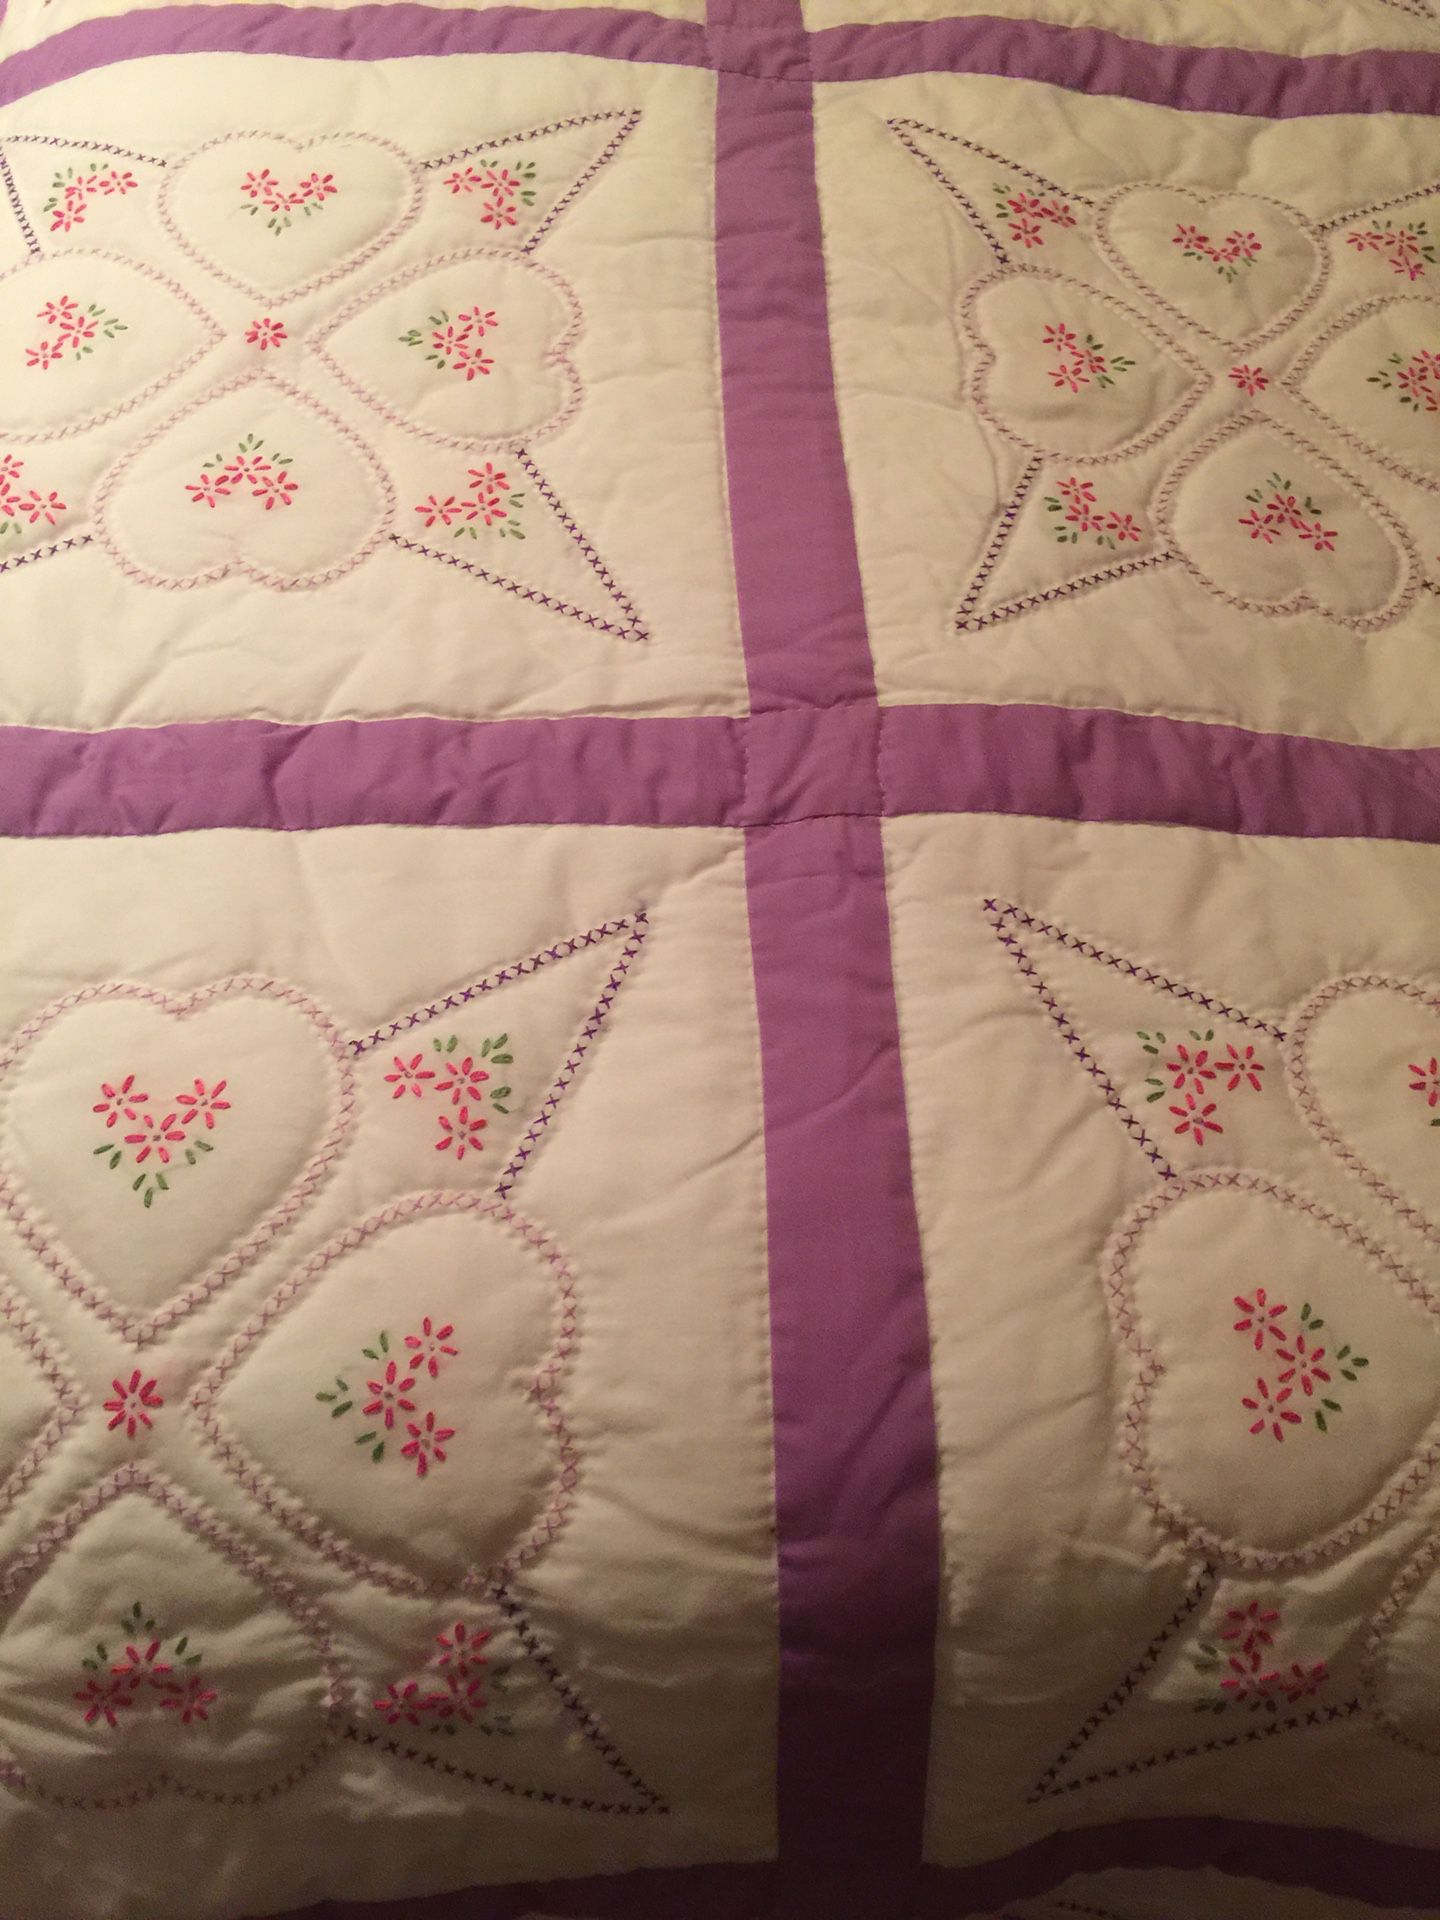 Homemade queen size quilt with two hands pillows